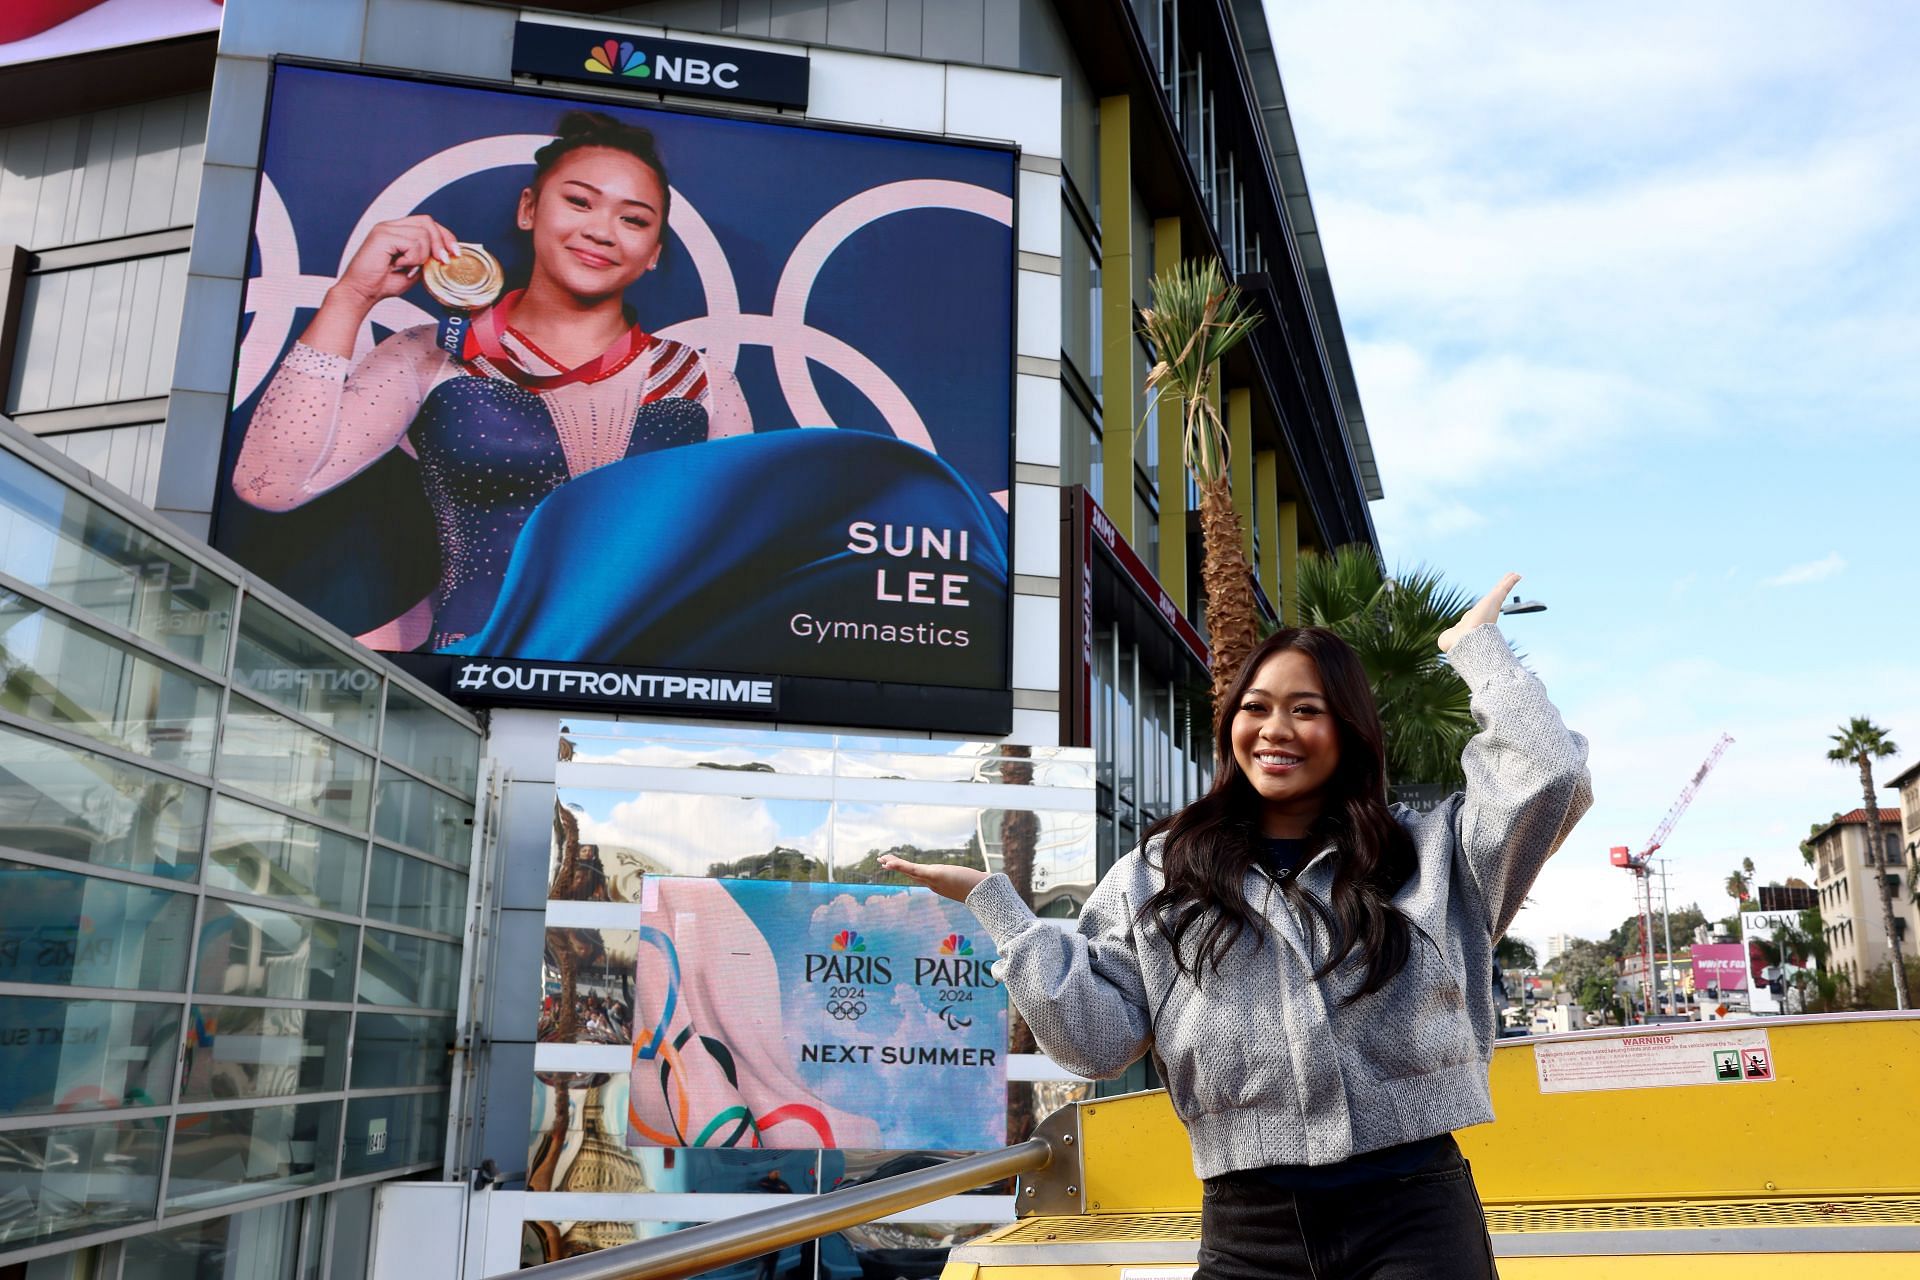 Suni Lee poses with her sign on the Sunset Strip during the Team USA Road to Paris Bus in Los Angeles, California.